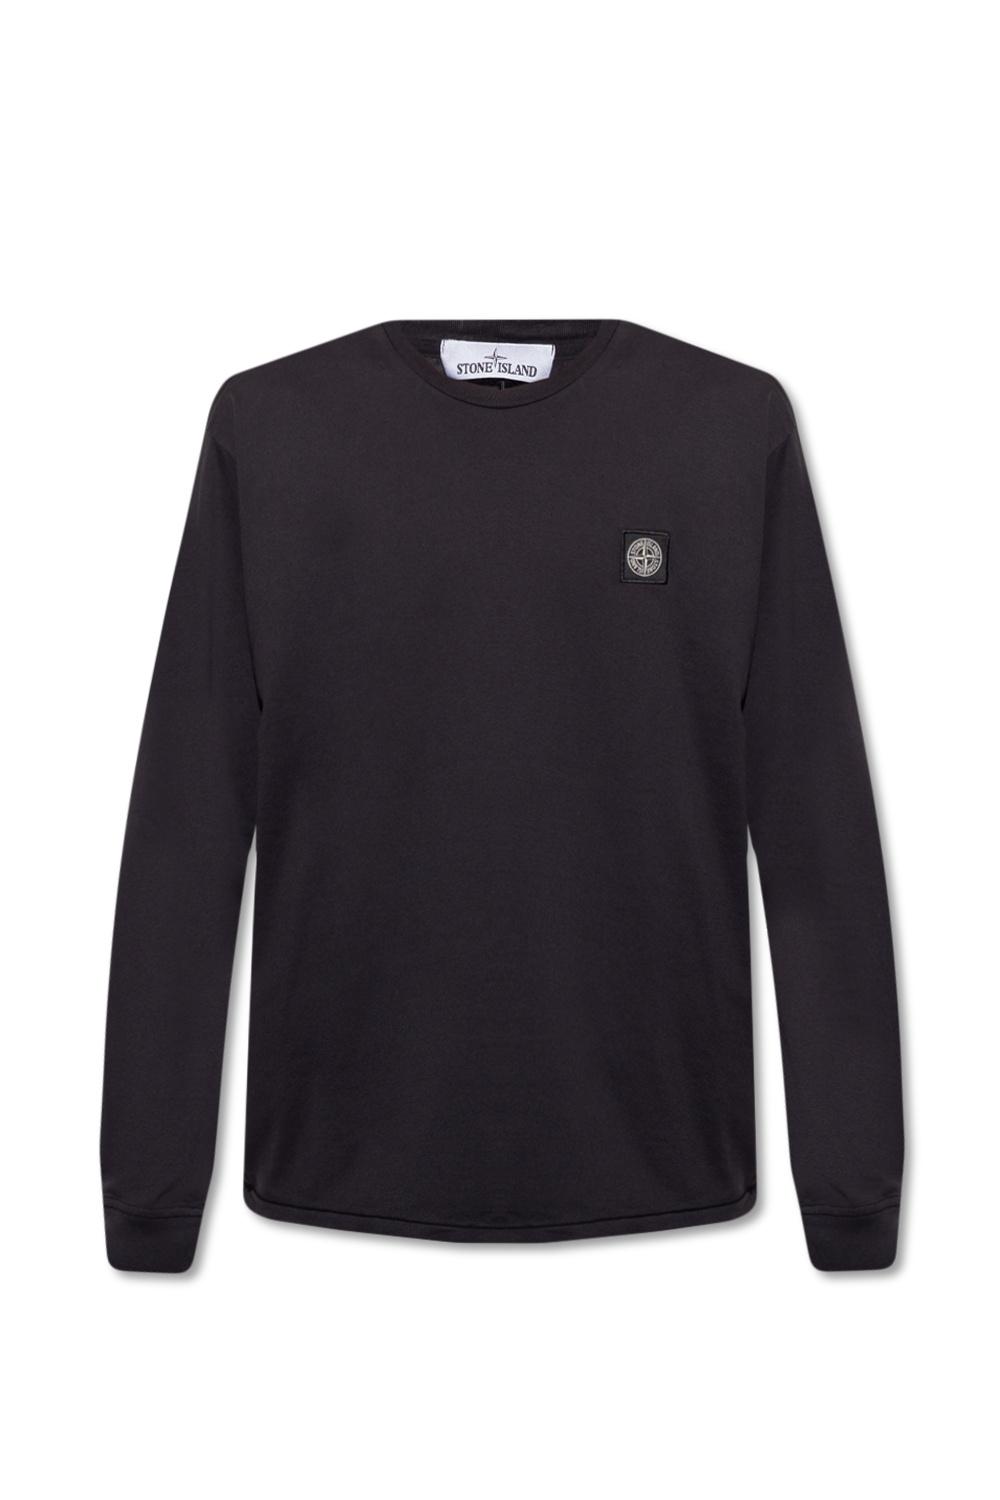 Stone Island Cotton Long-sleeved T-shirt in Black for Men | Lyst